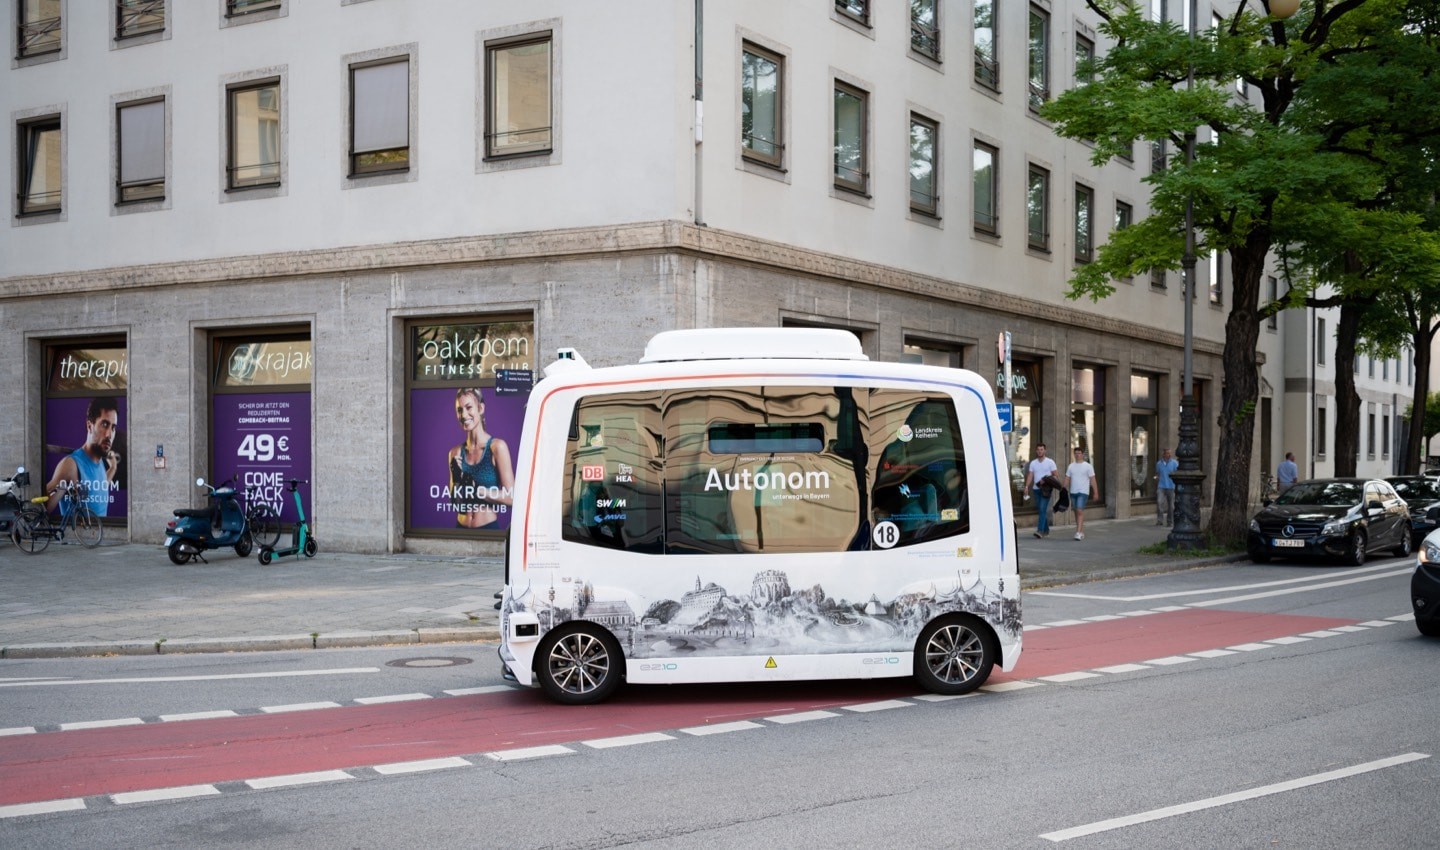 The IAA had its own autonomous shuttle bus driving through Munich during the event.